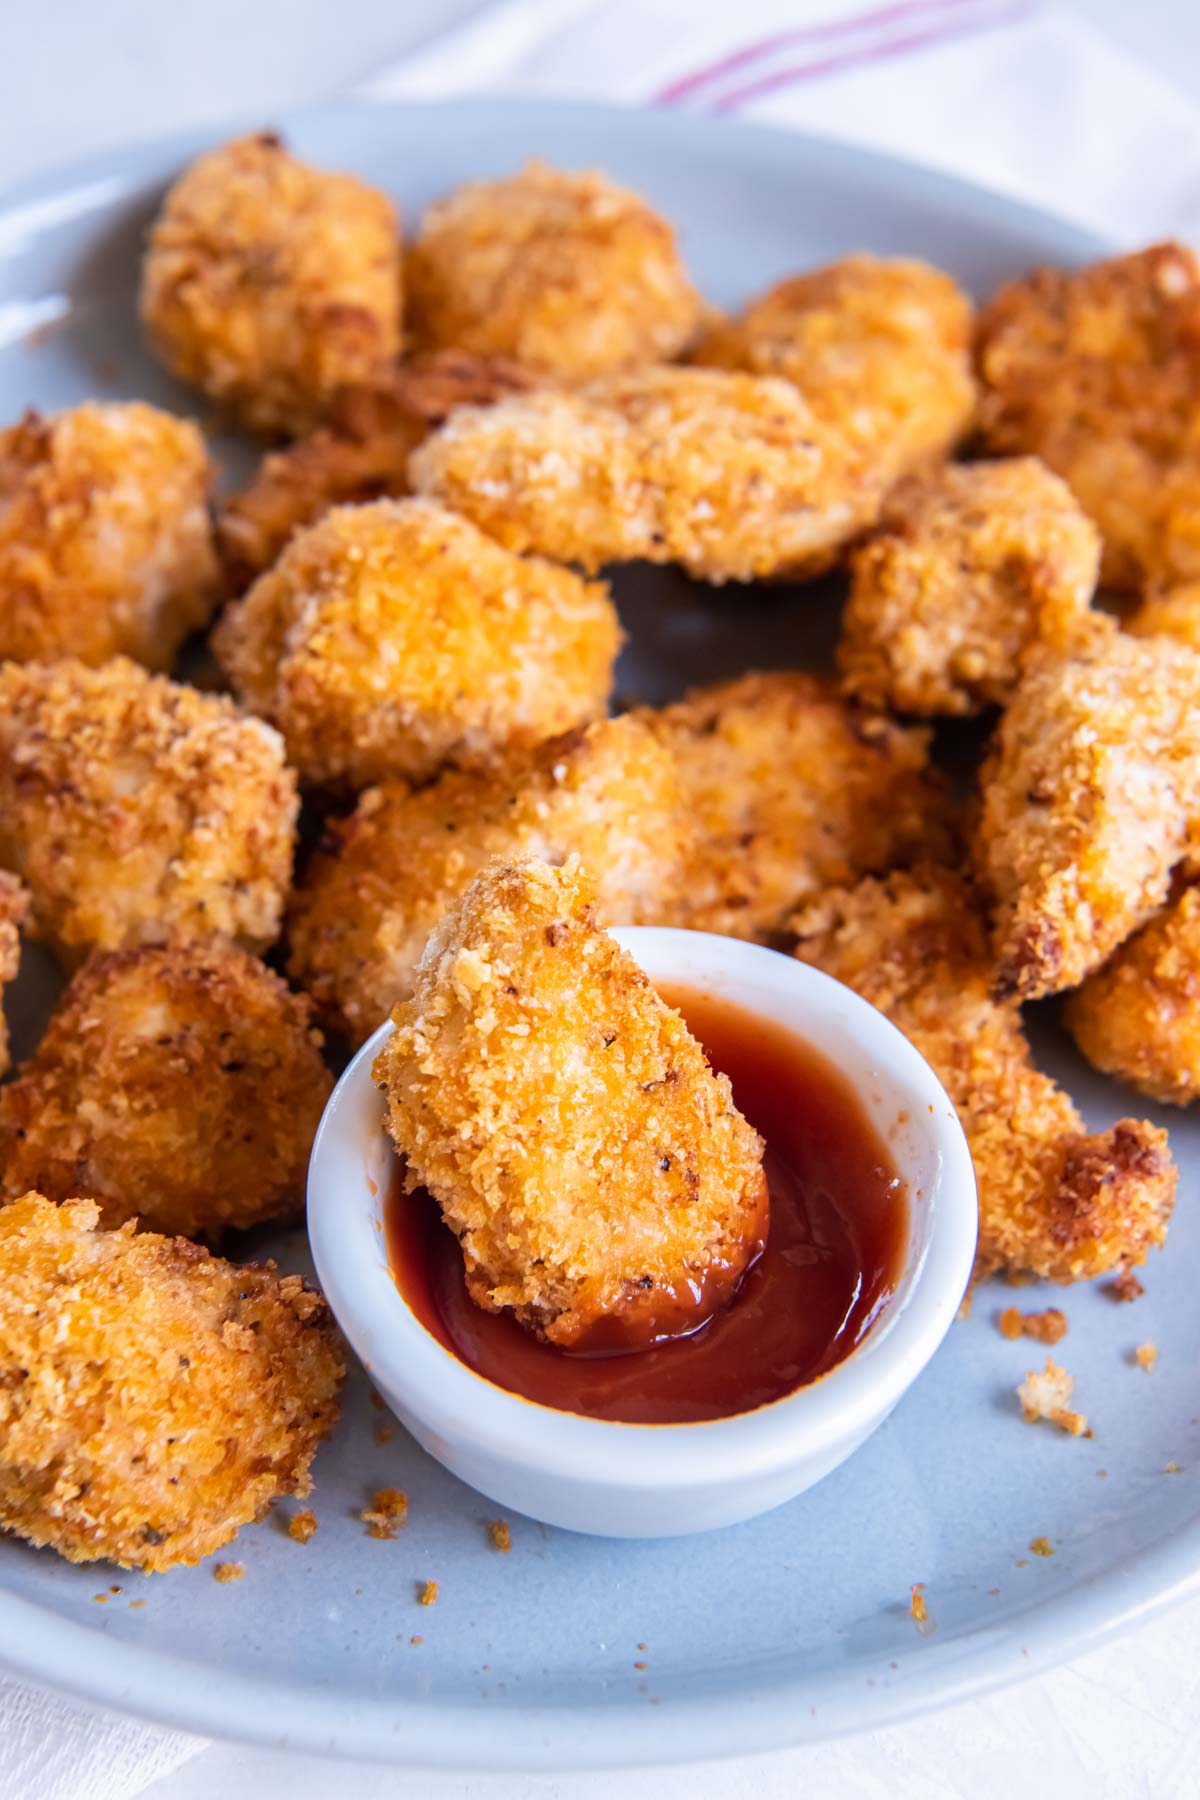 Chicken nuggets on a plate with one nugget dipped in a small dish of ketchup.